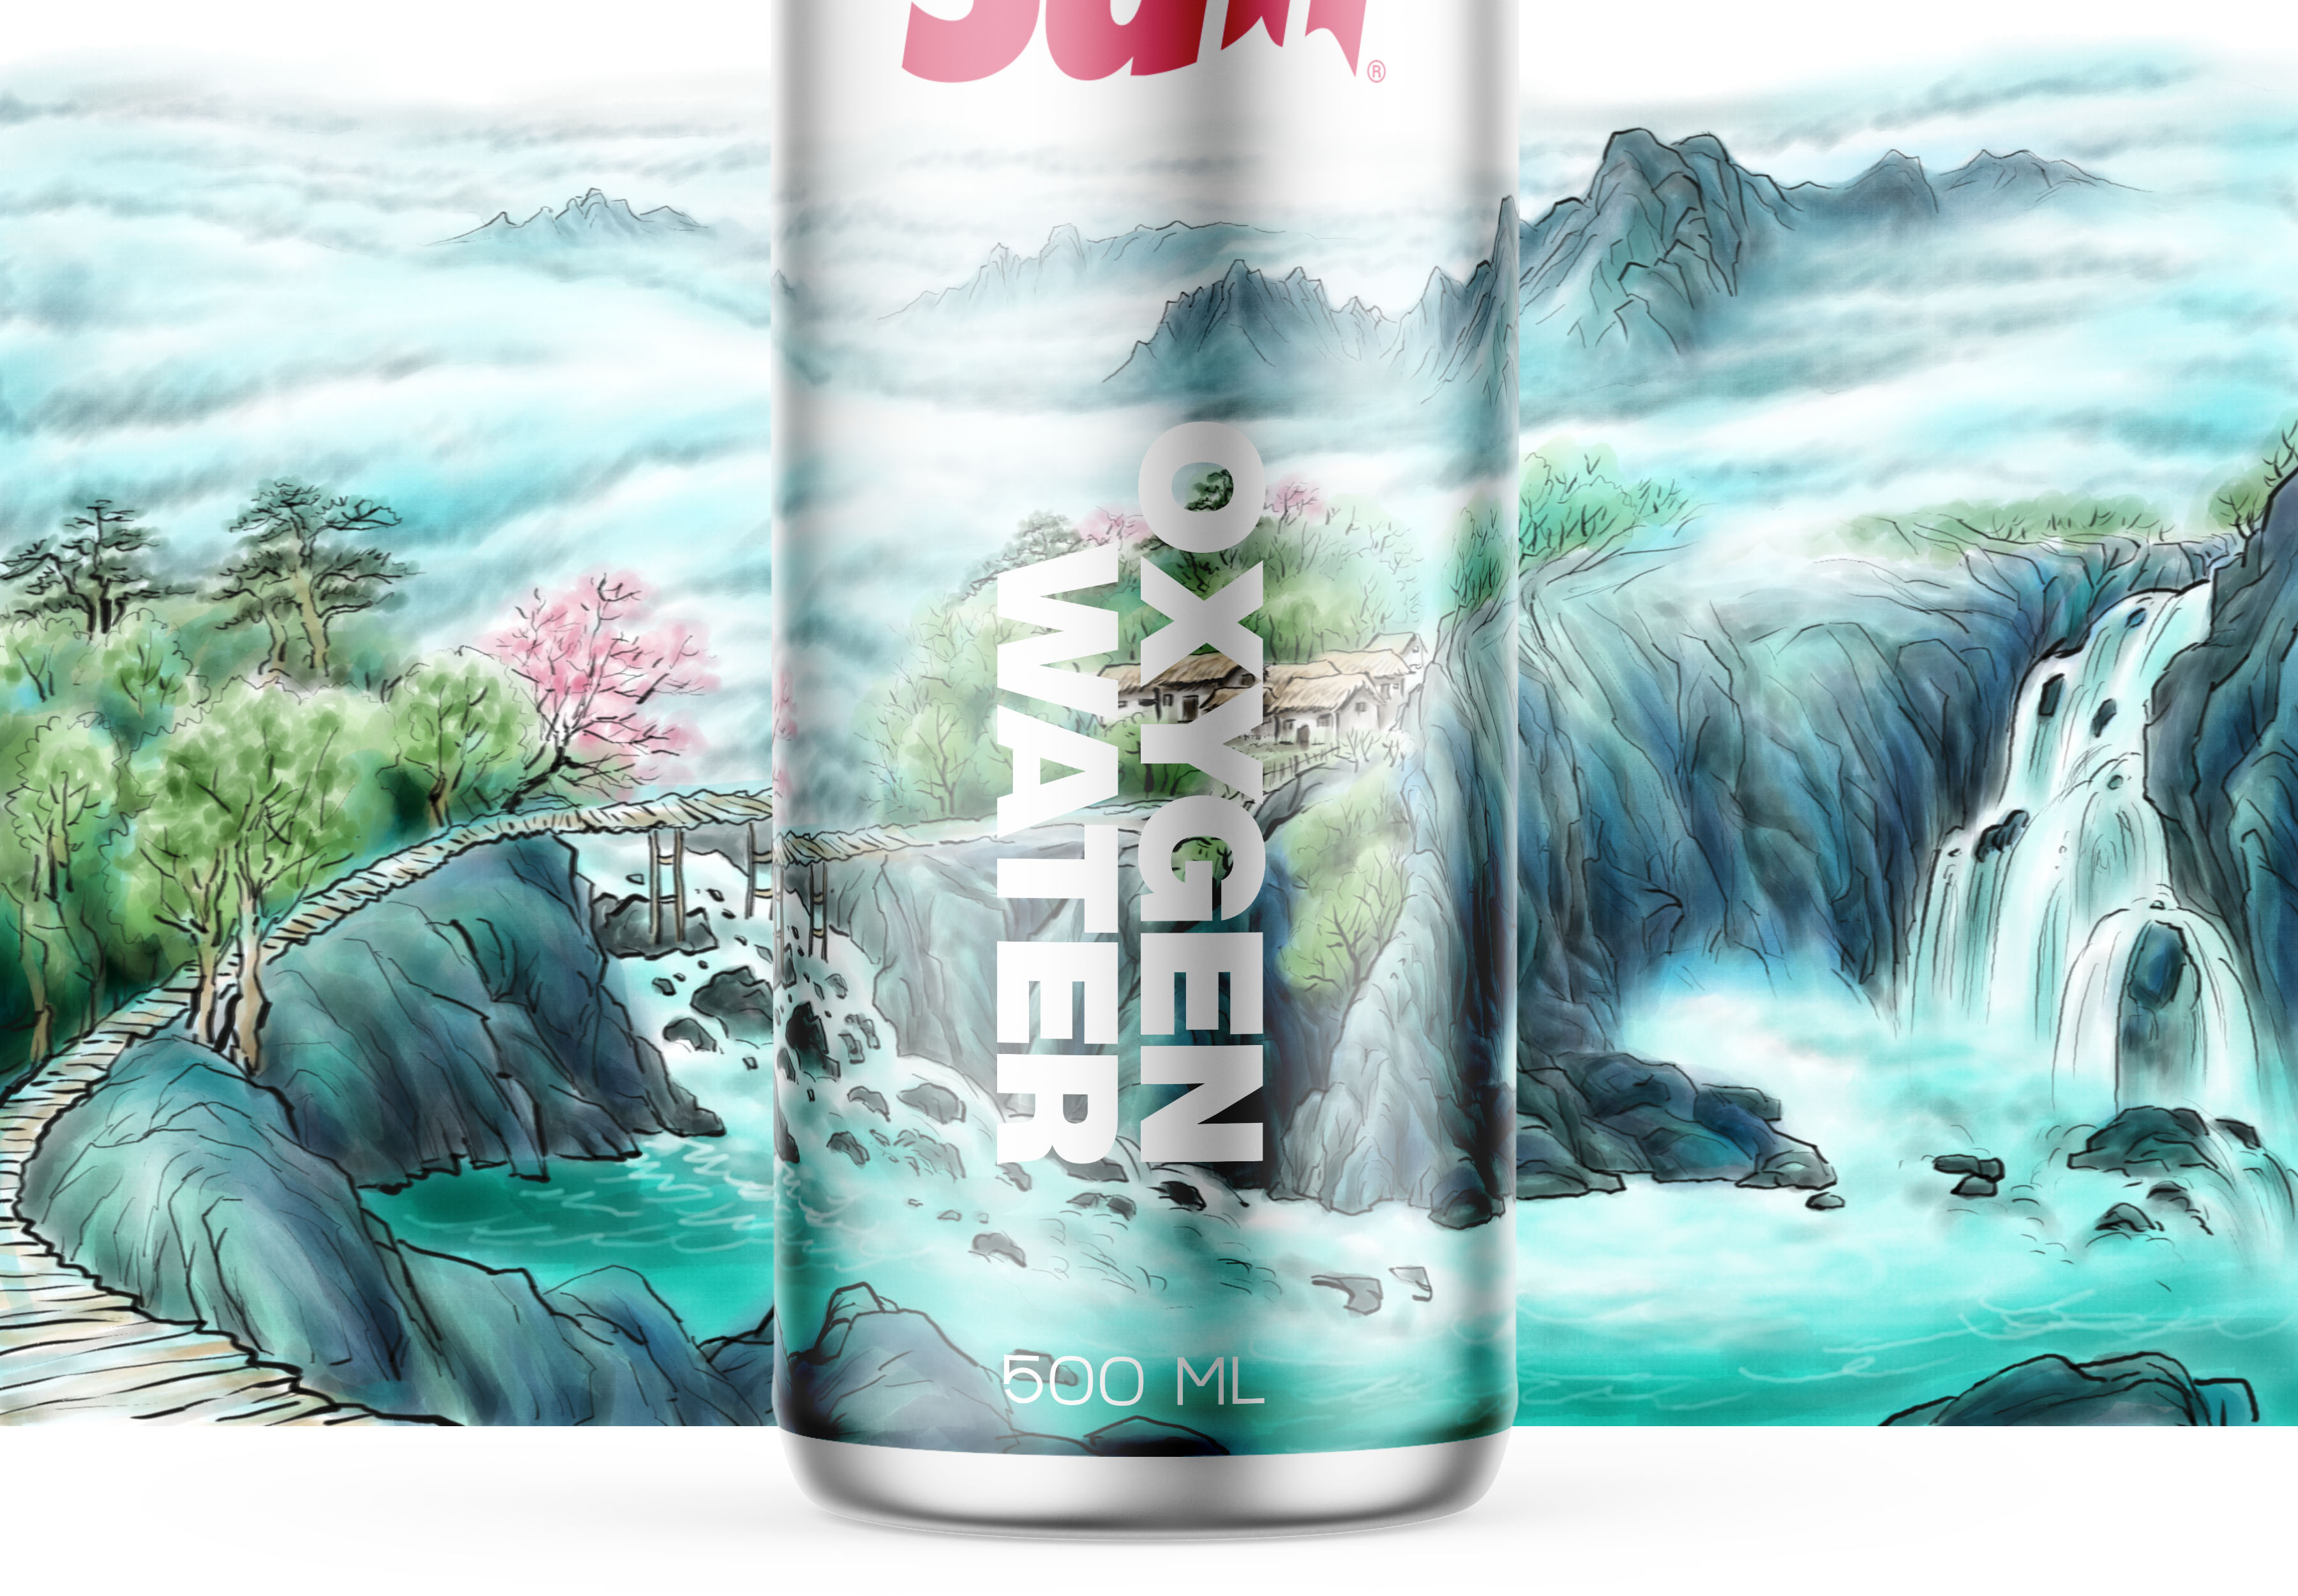 Widarto Impact Creating “Nature Touch” for SAM Oxygen Water Can Packaging